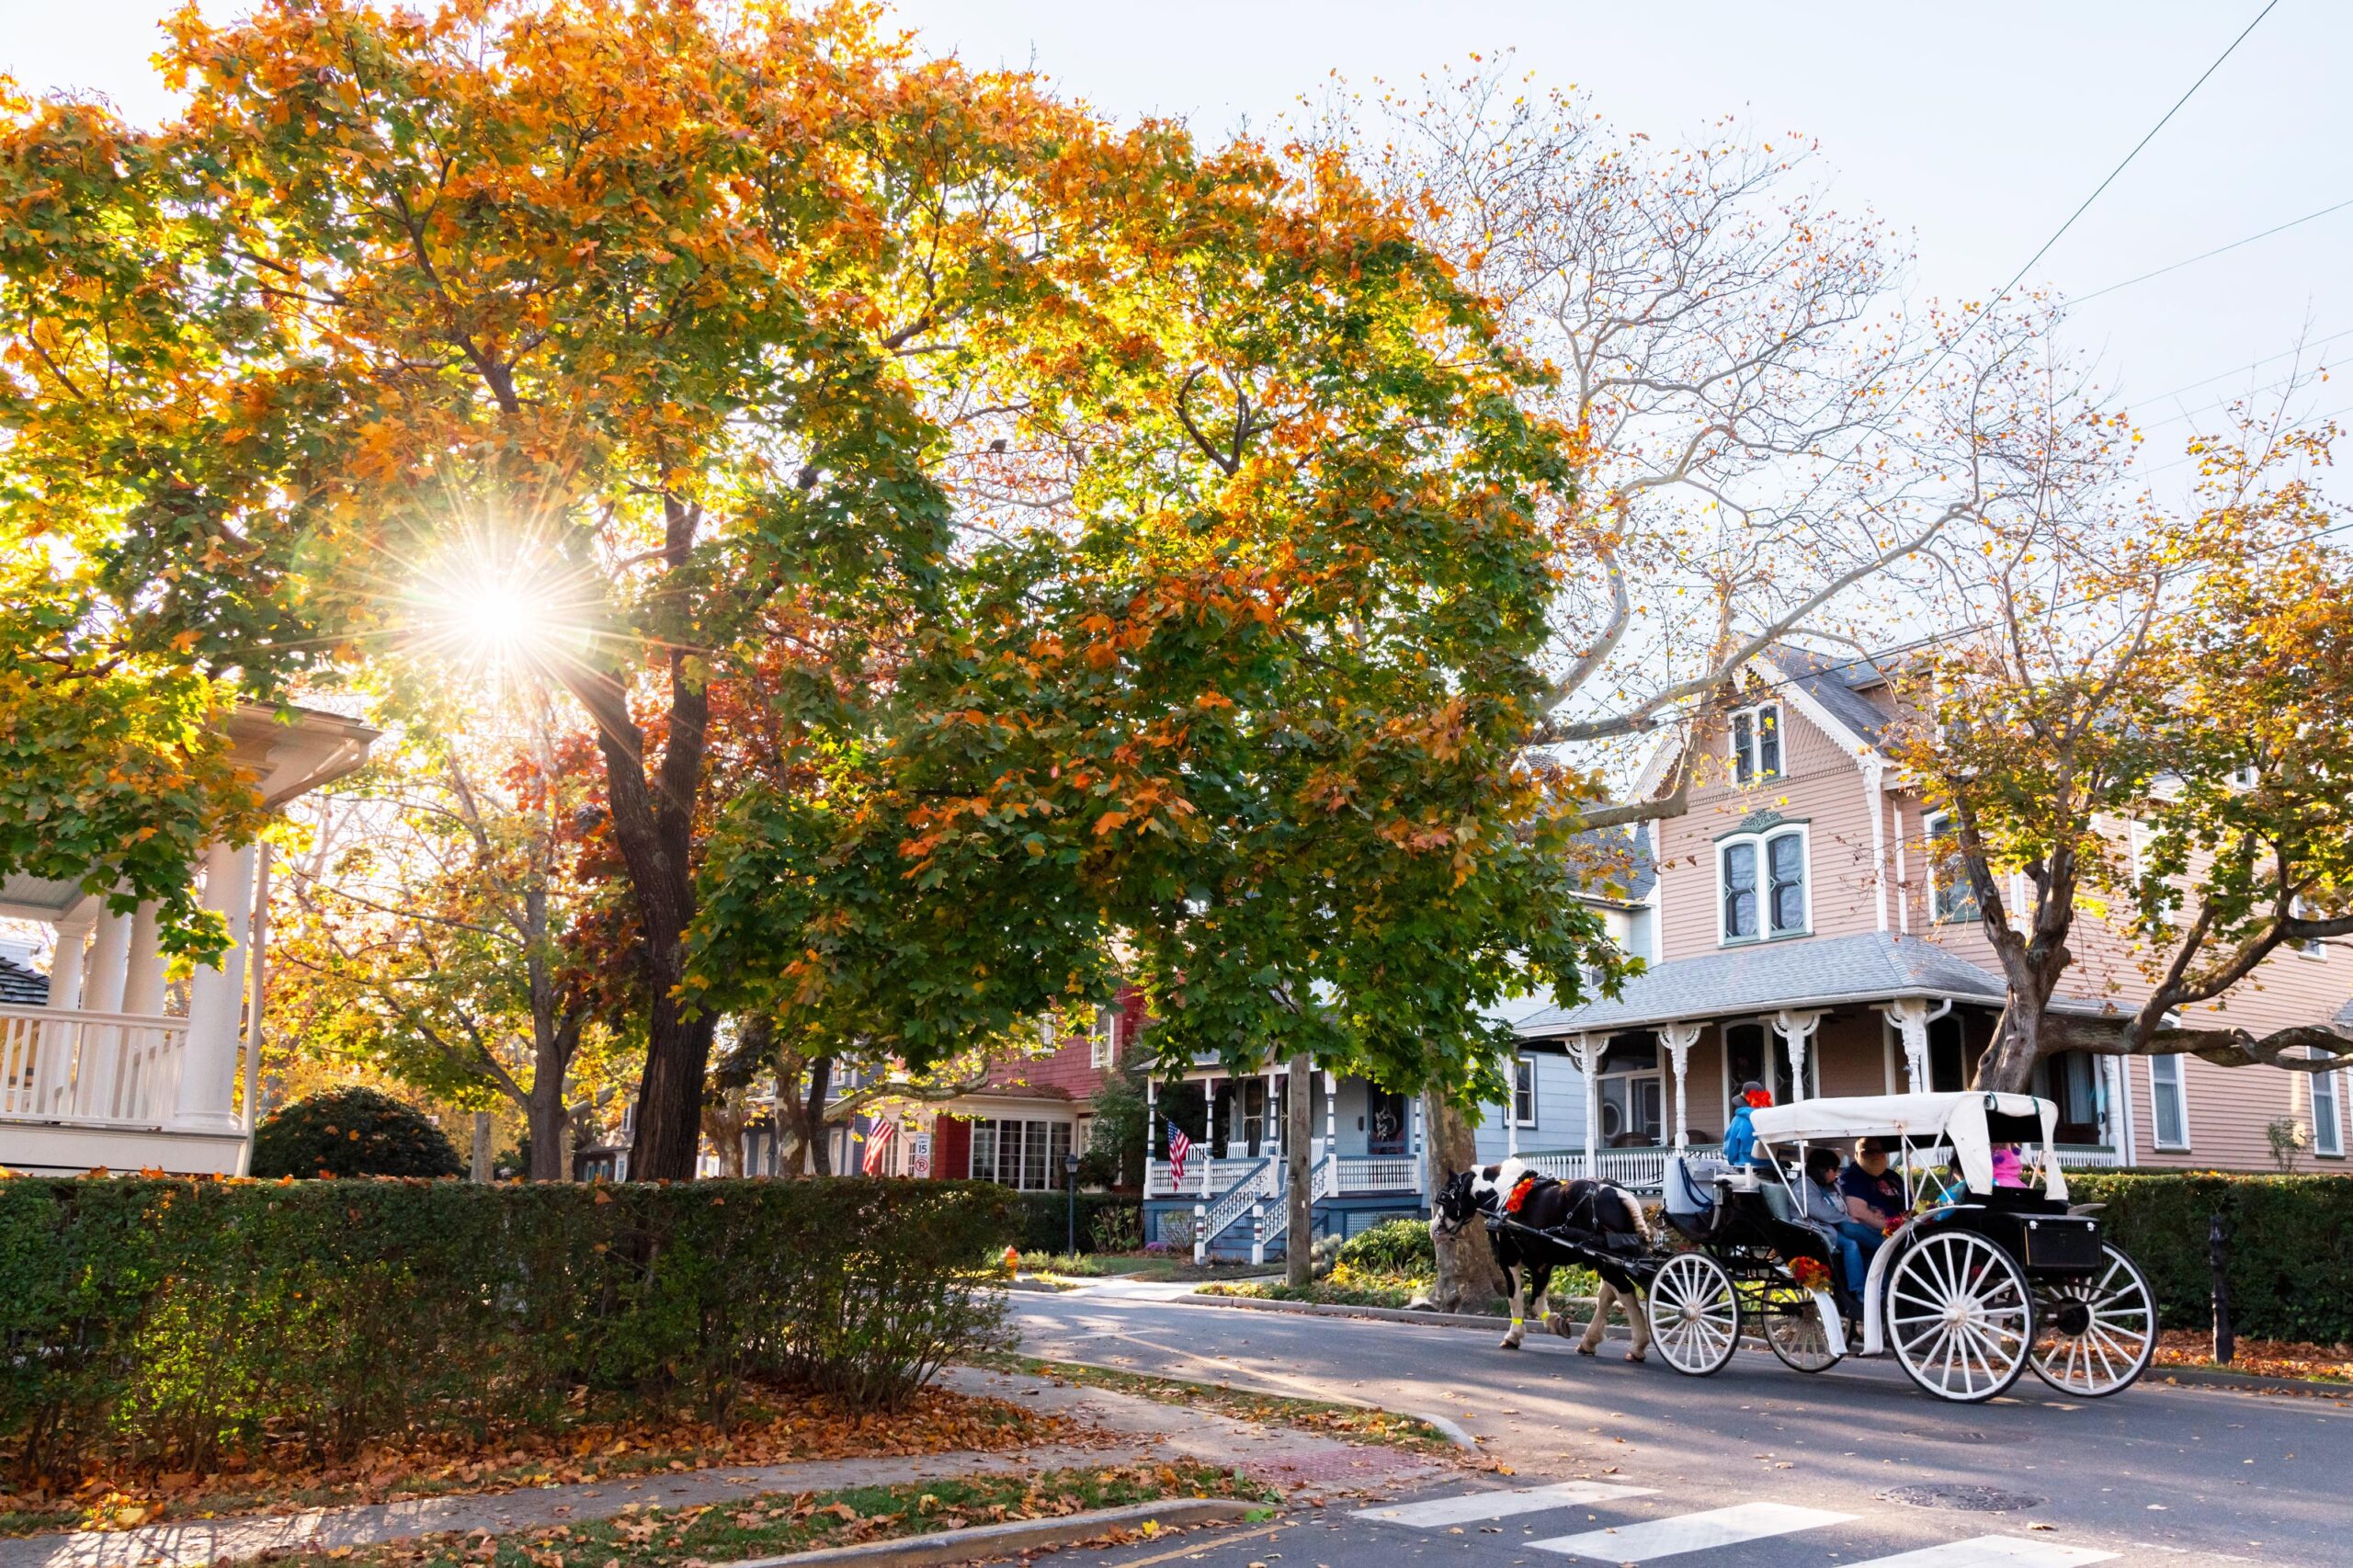 A horse carriage ride going down Hughes Street with sunlight streaming through orange, red, yellow, and green leaves on a big tree on the street corner